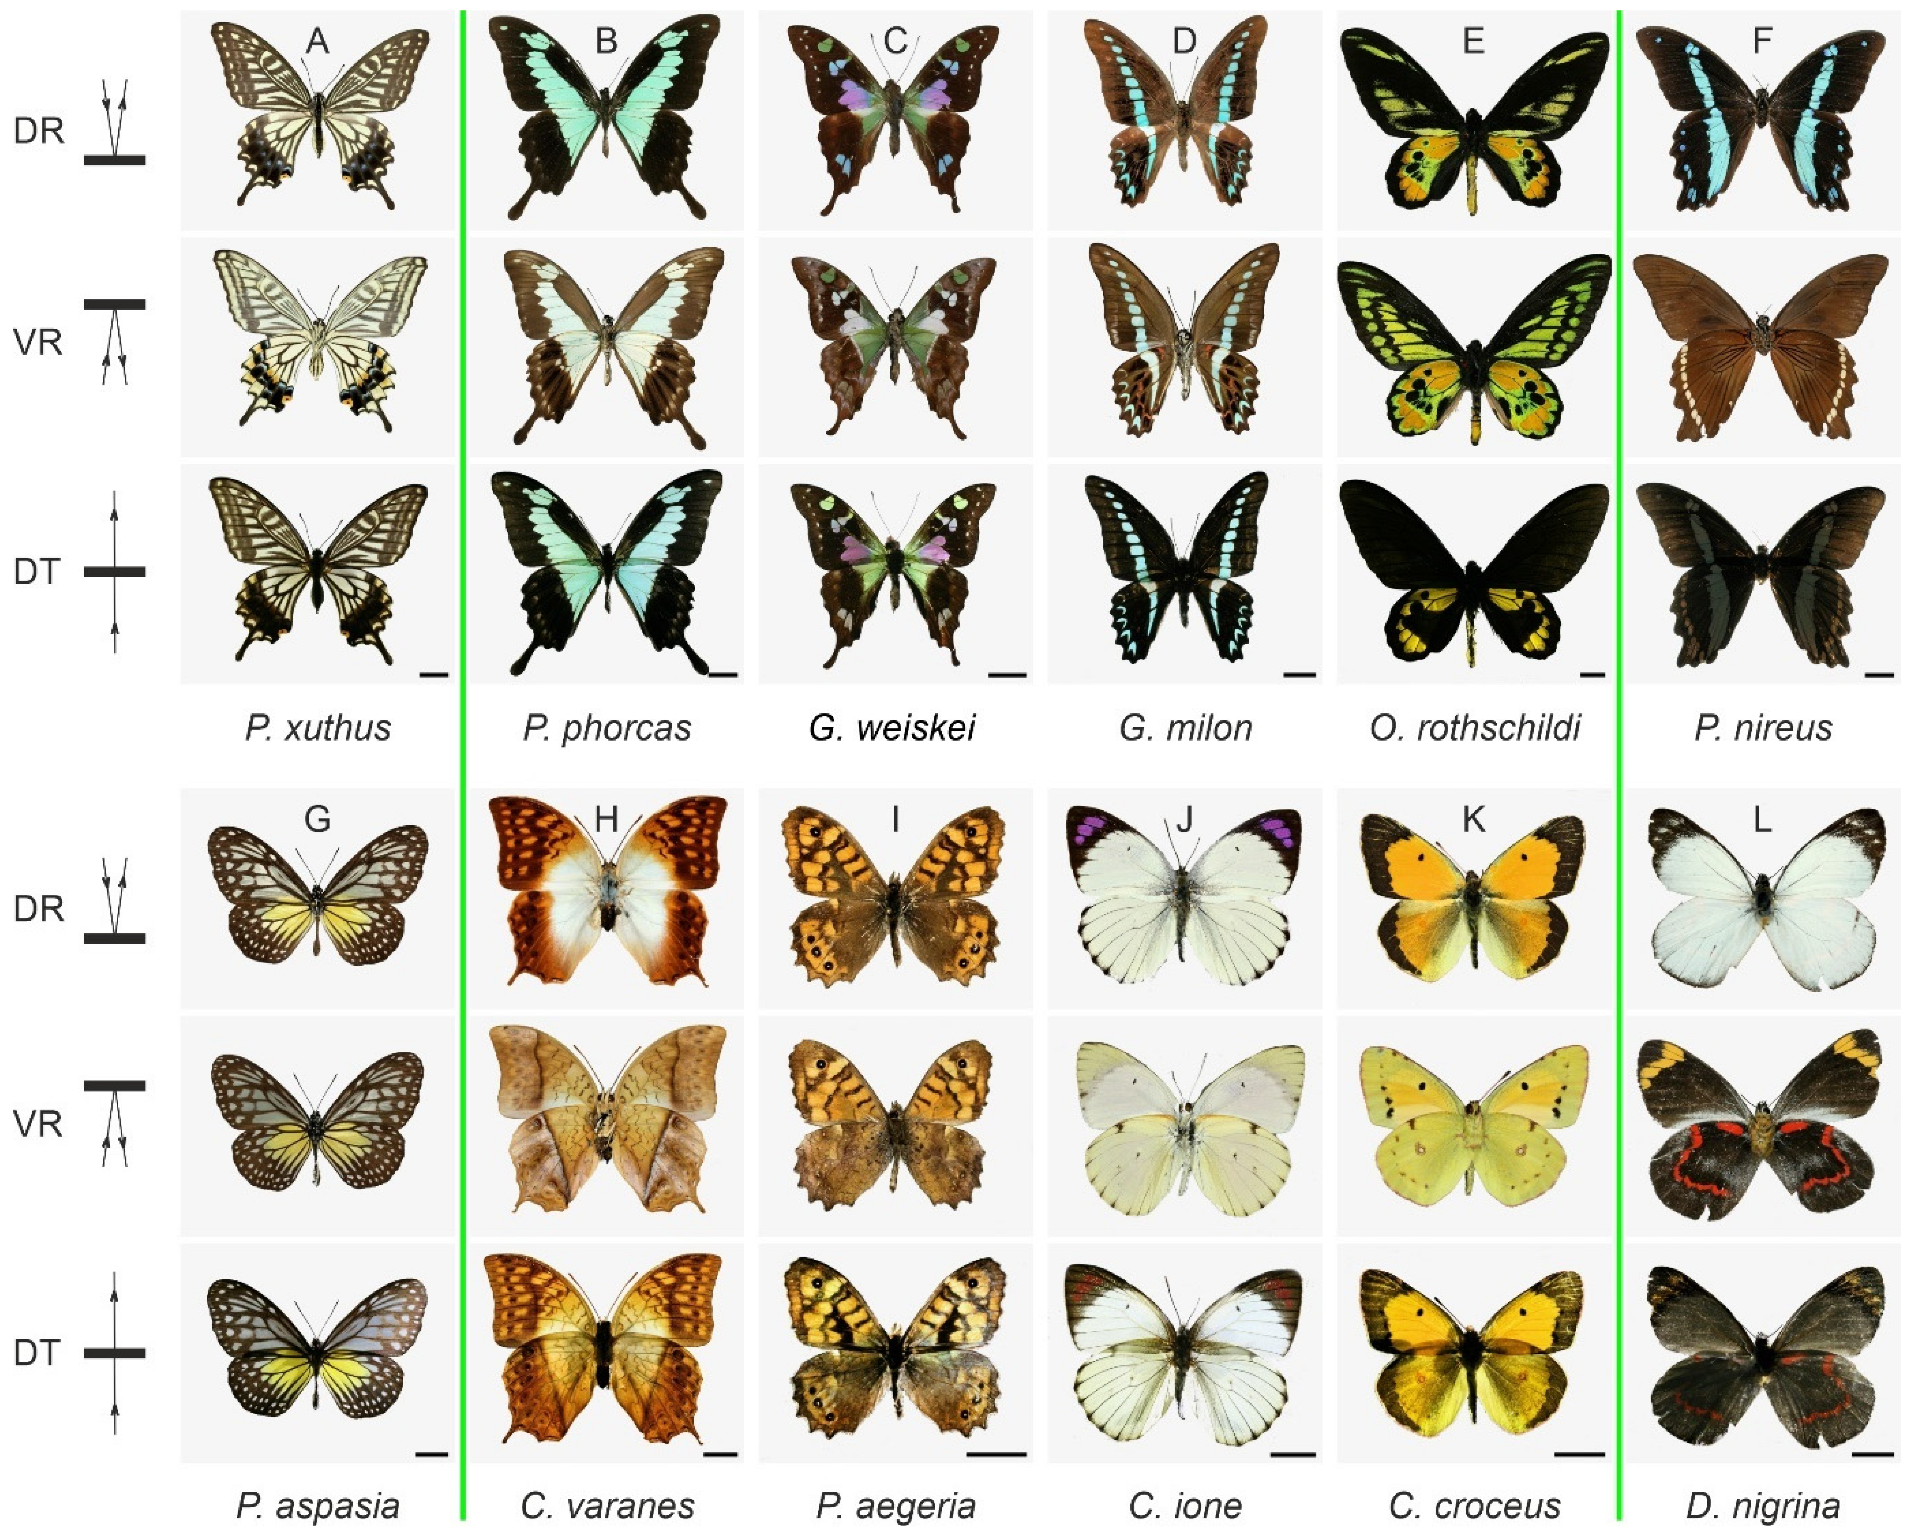 The Brand New Eyes Butterfly Explained